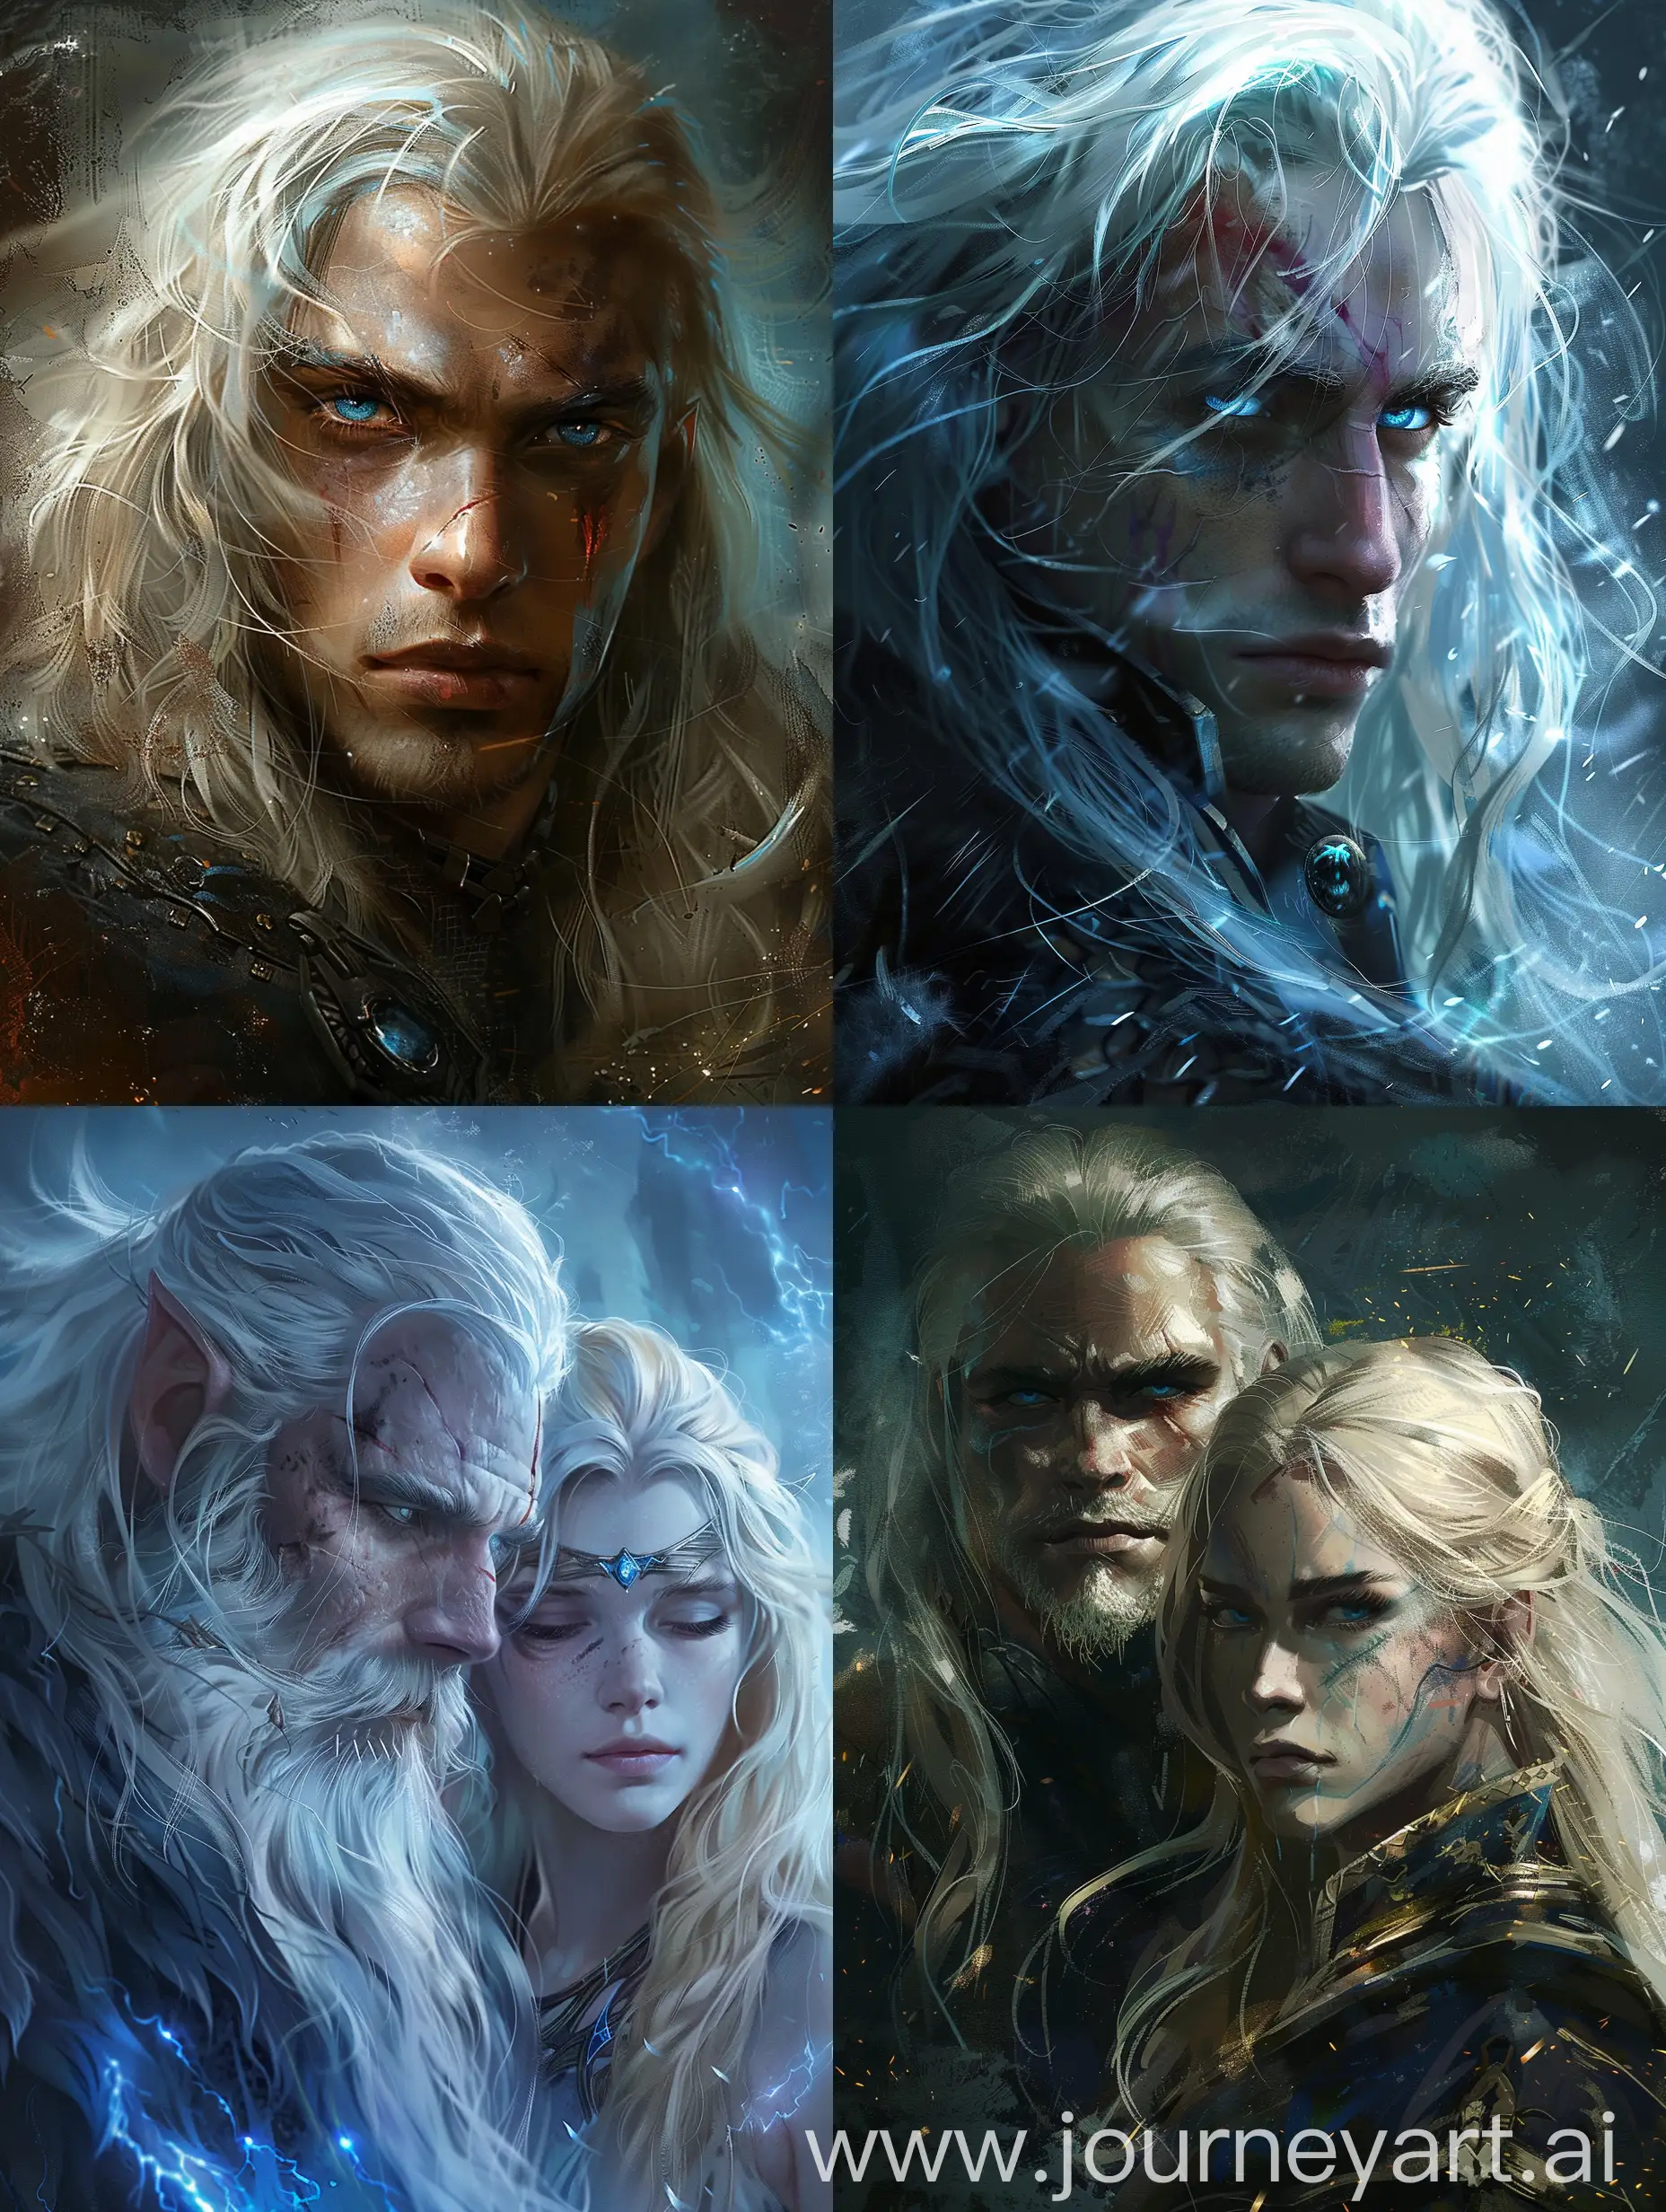 Fantasy-Art-Thunder-Lord-with-White-Hair-and-Scarred-Face-with-Blonde-Girl